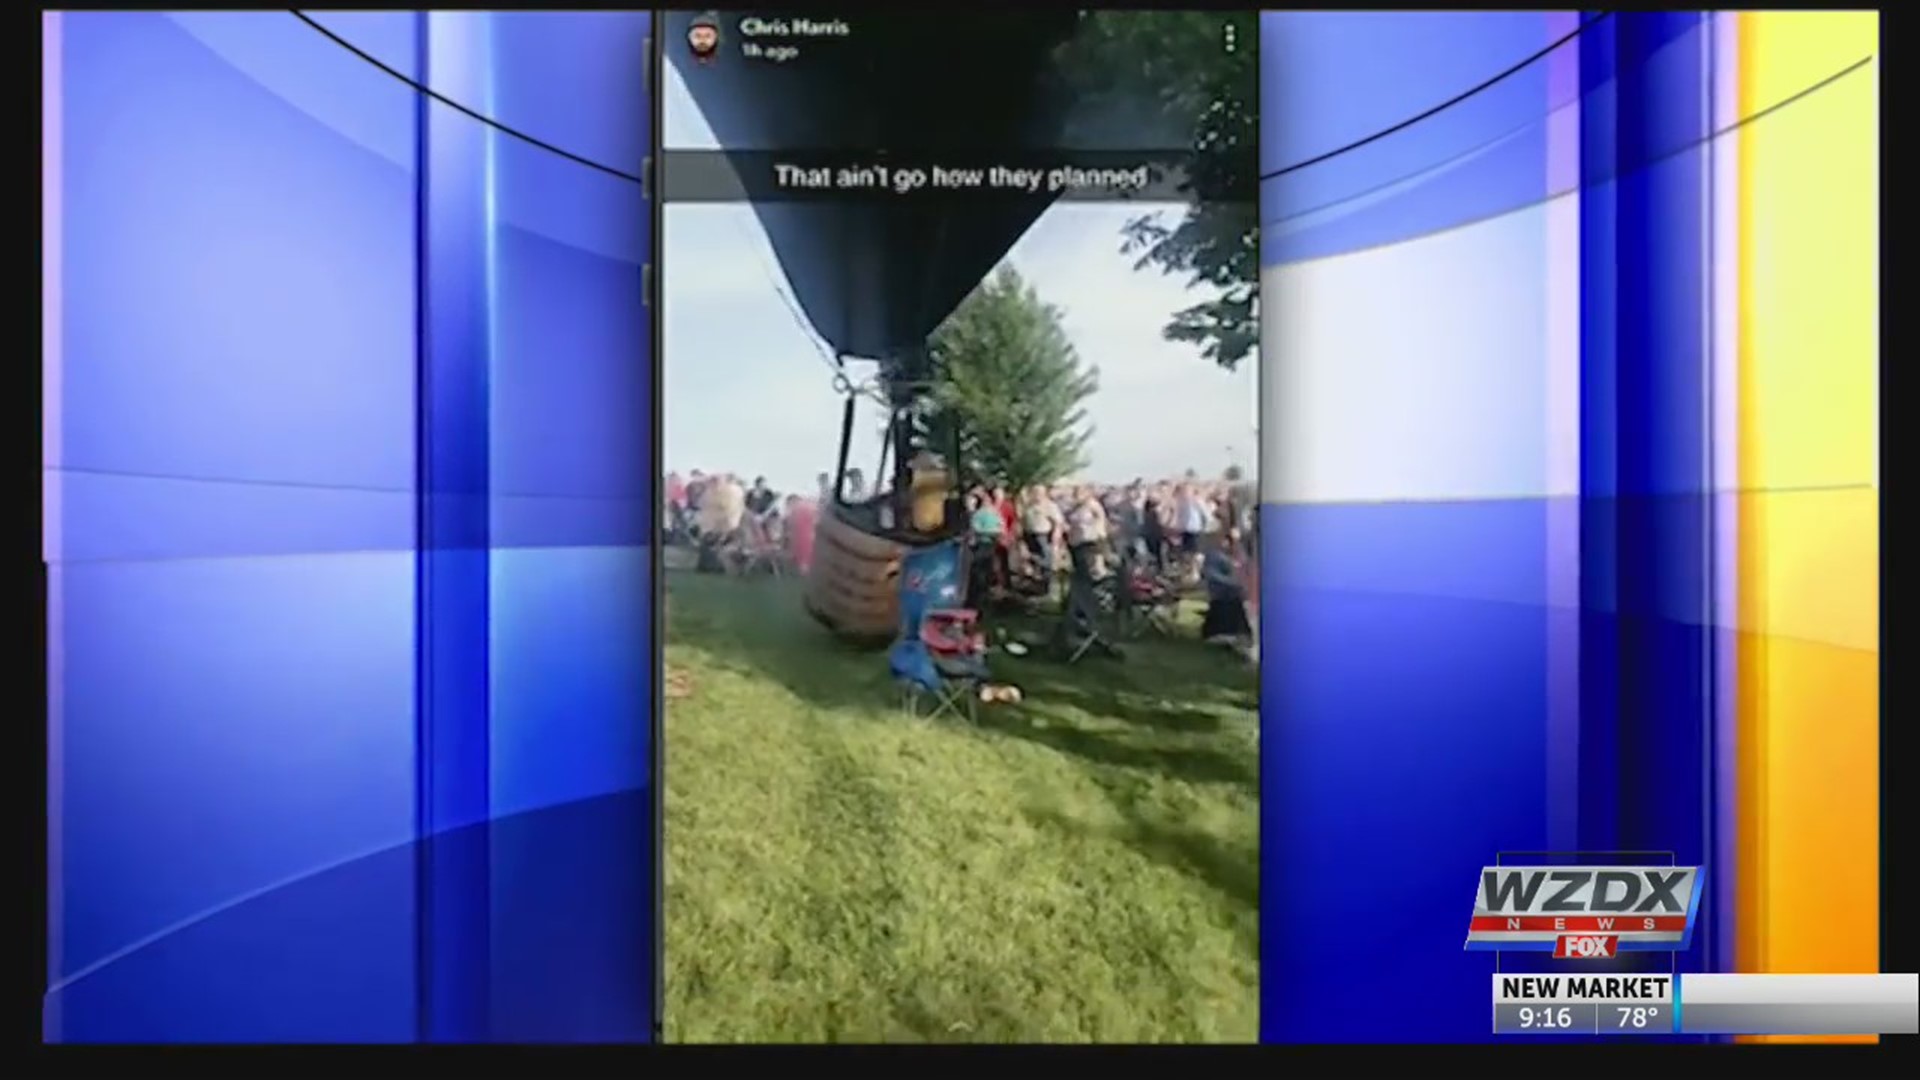 Some scary moments in Missouri when a hot air balloon made a hard landing into a crowd of spectators at a festival.